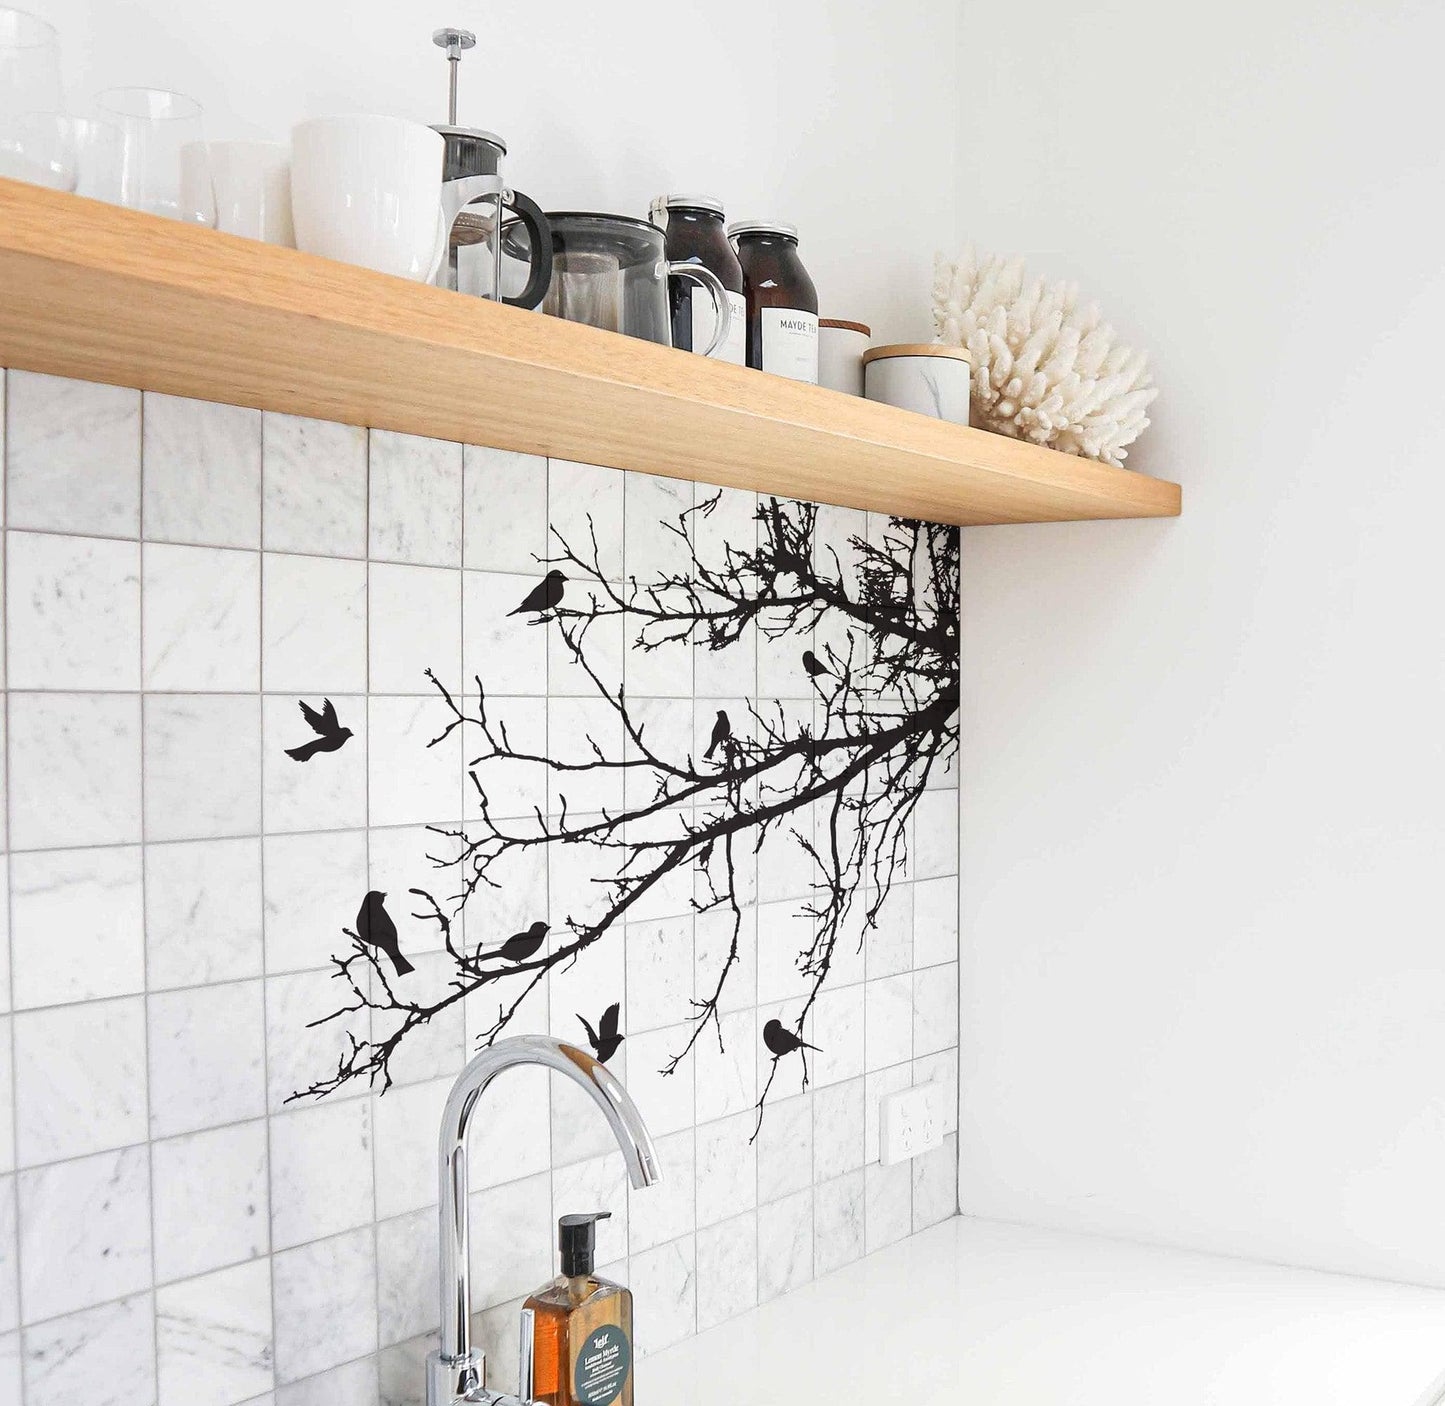 Black decal of 8 birds on tree branches on a white wall near a kitchen sink.